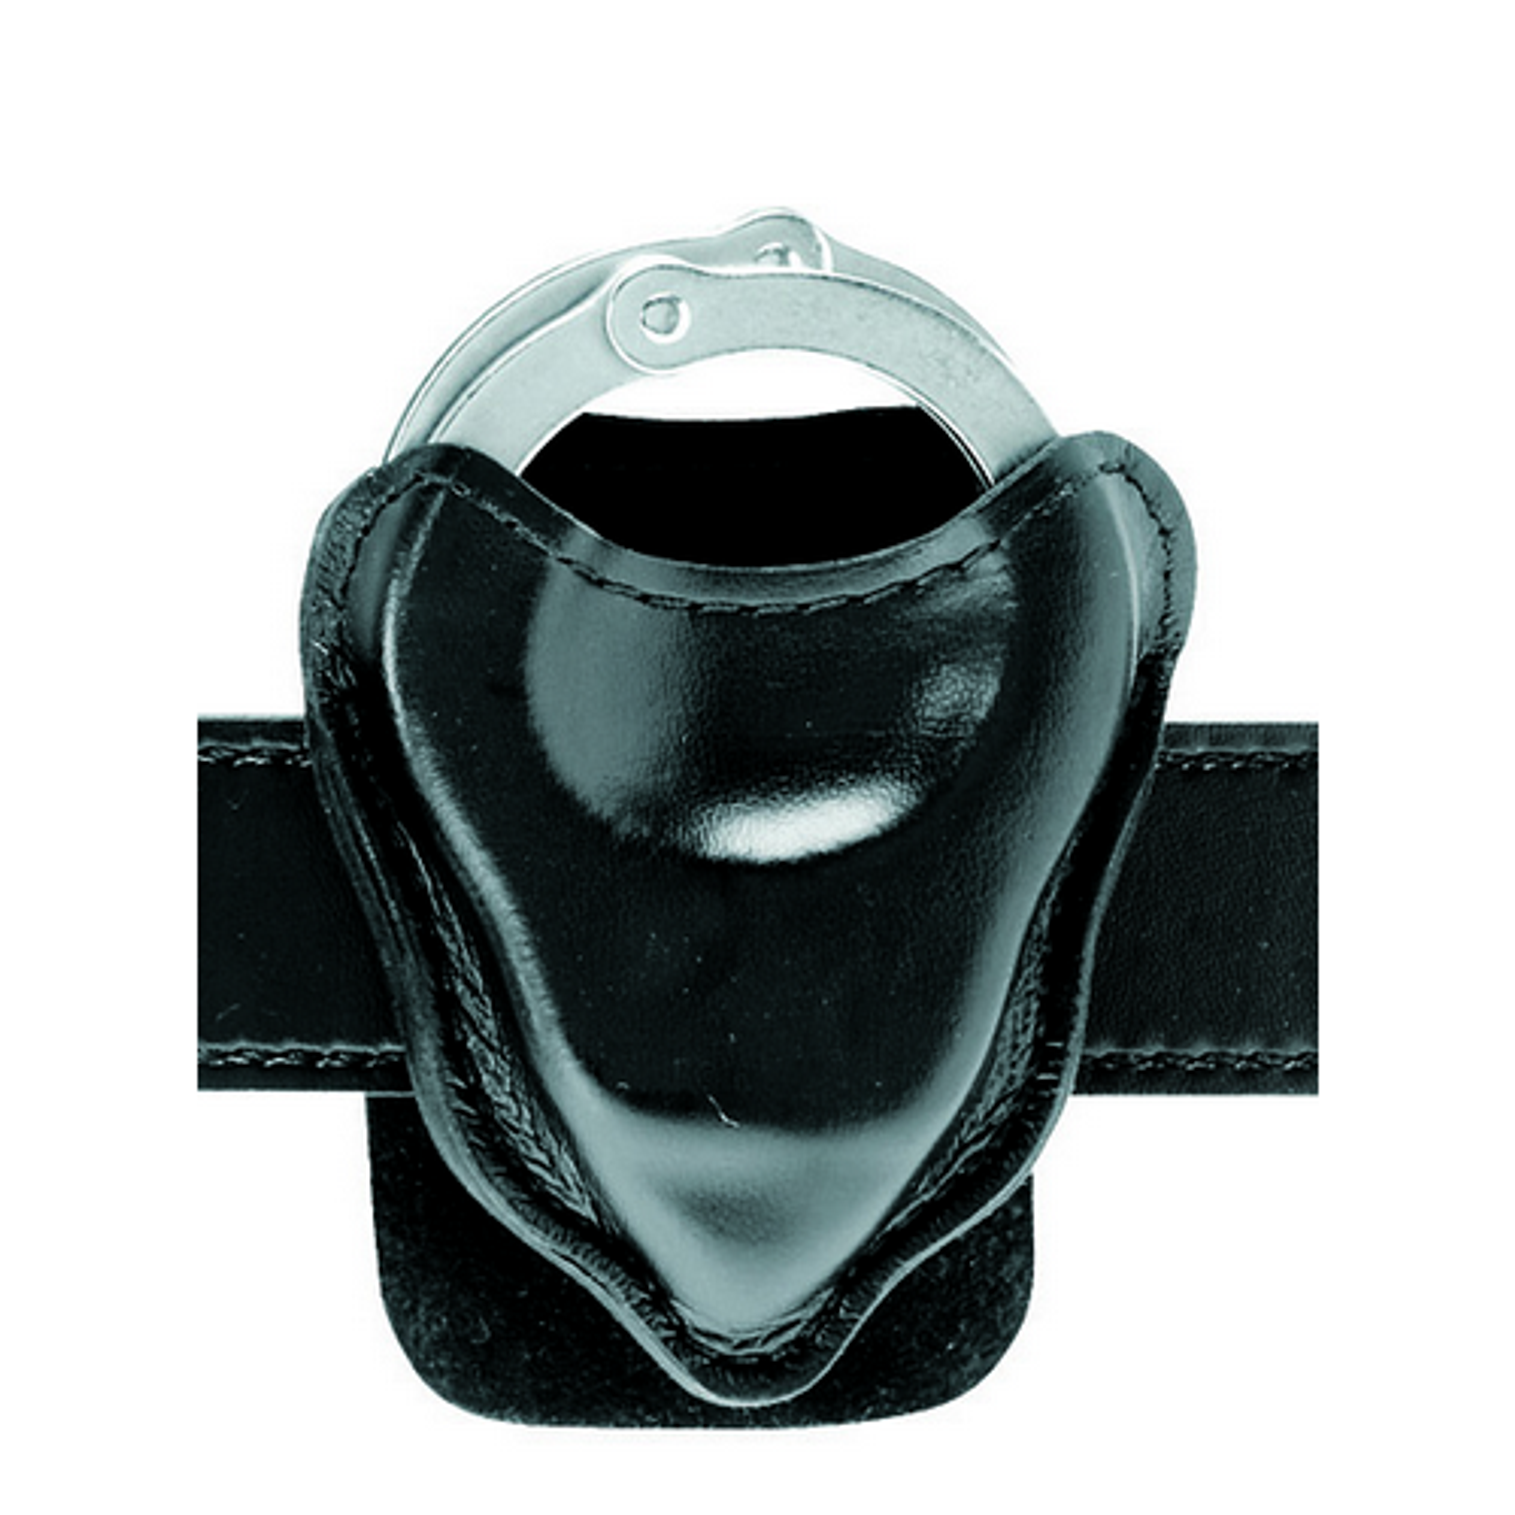 Model 590 Open Top Handcuff Case, Paddle